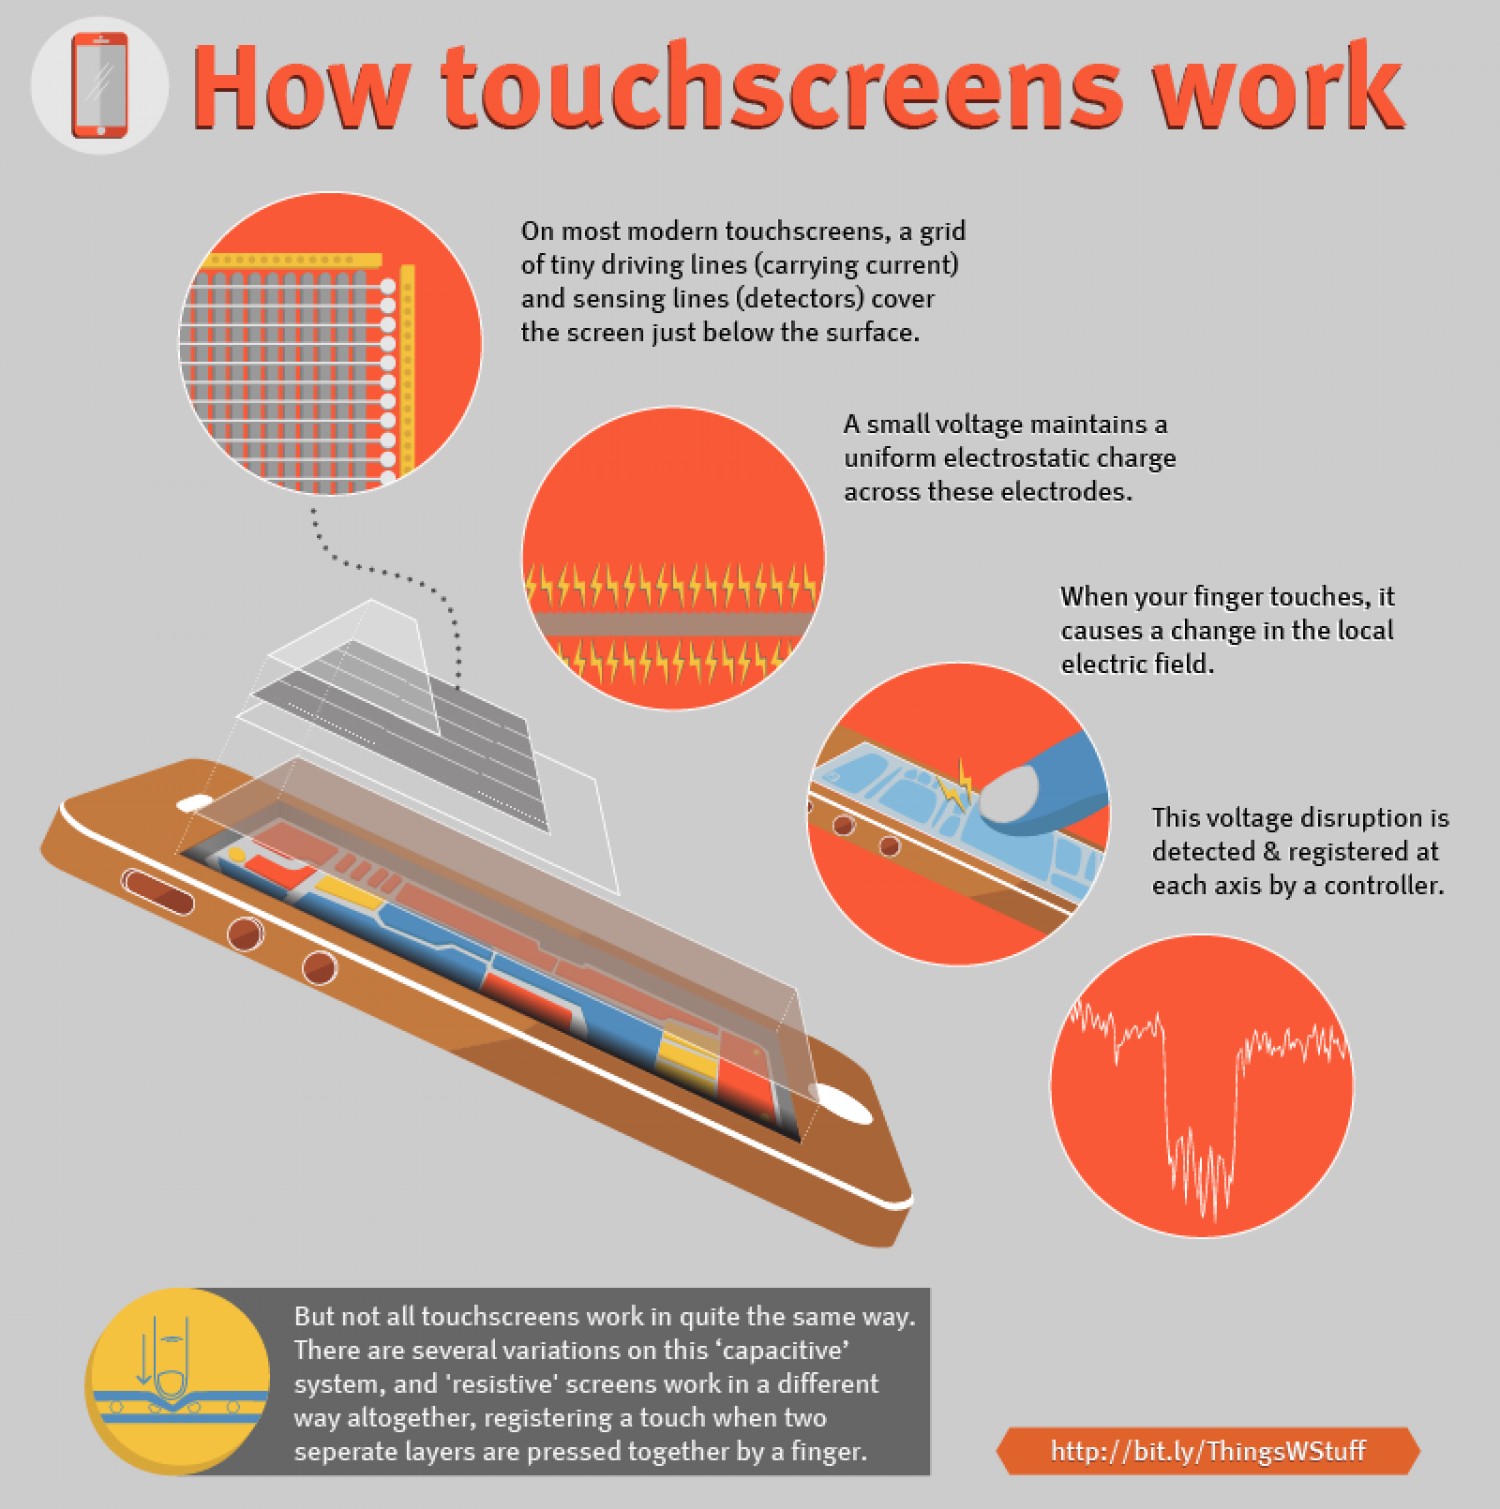 how touchscreens work infographic